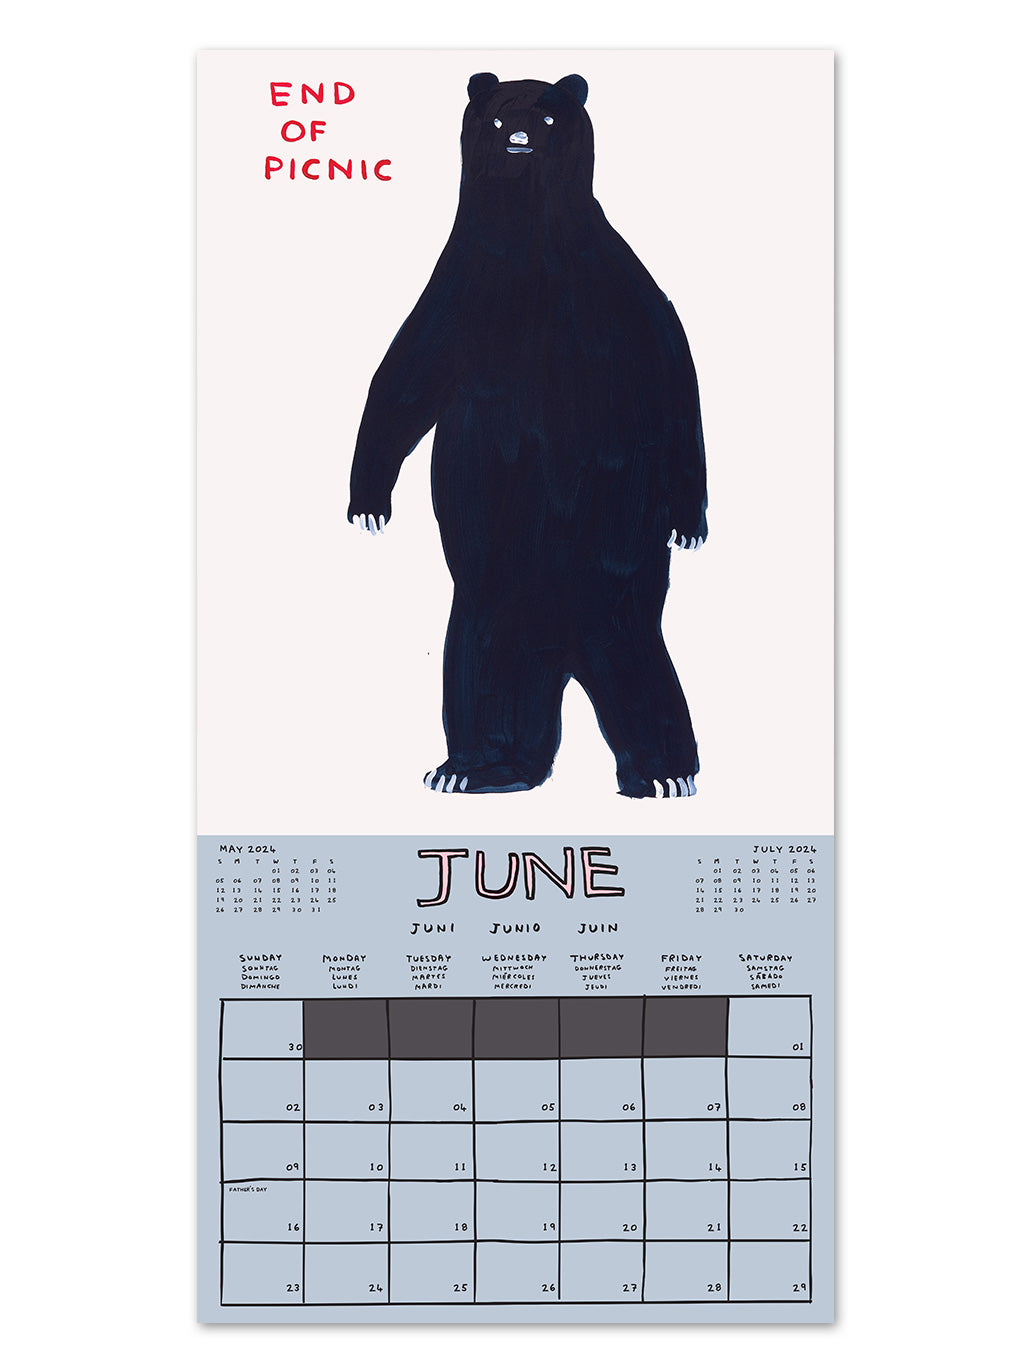 An example of the layout of a 2024 calendar by artist David Shrigley. June shows a light blue calendar section with a box allocated to each day of the month. The artwork on the top half of the page has a white background and shows a standing bear staring the words - end of picnic.